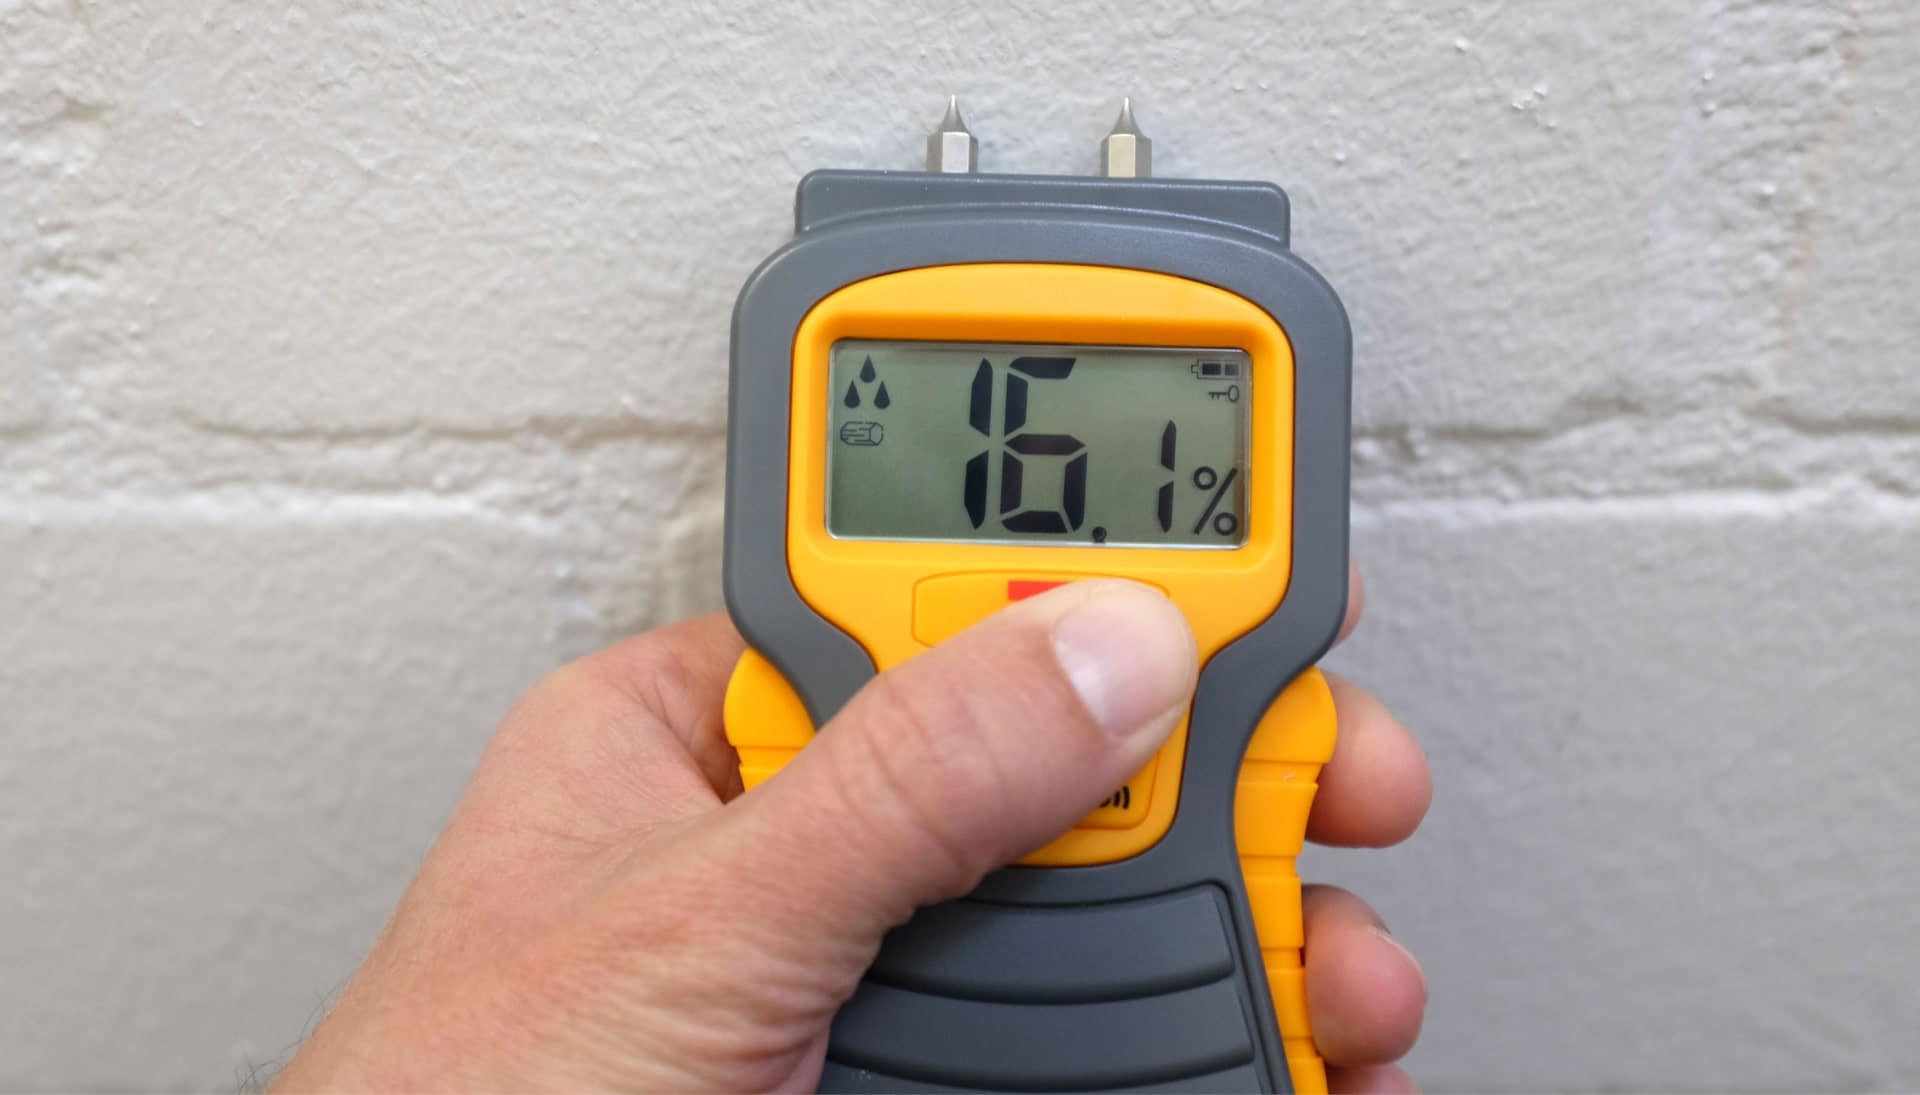 We provide fast, accurate, and affordable mold testing services in Cleveland, Ohio.